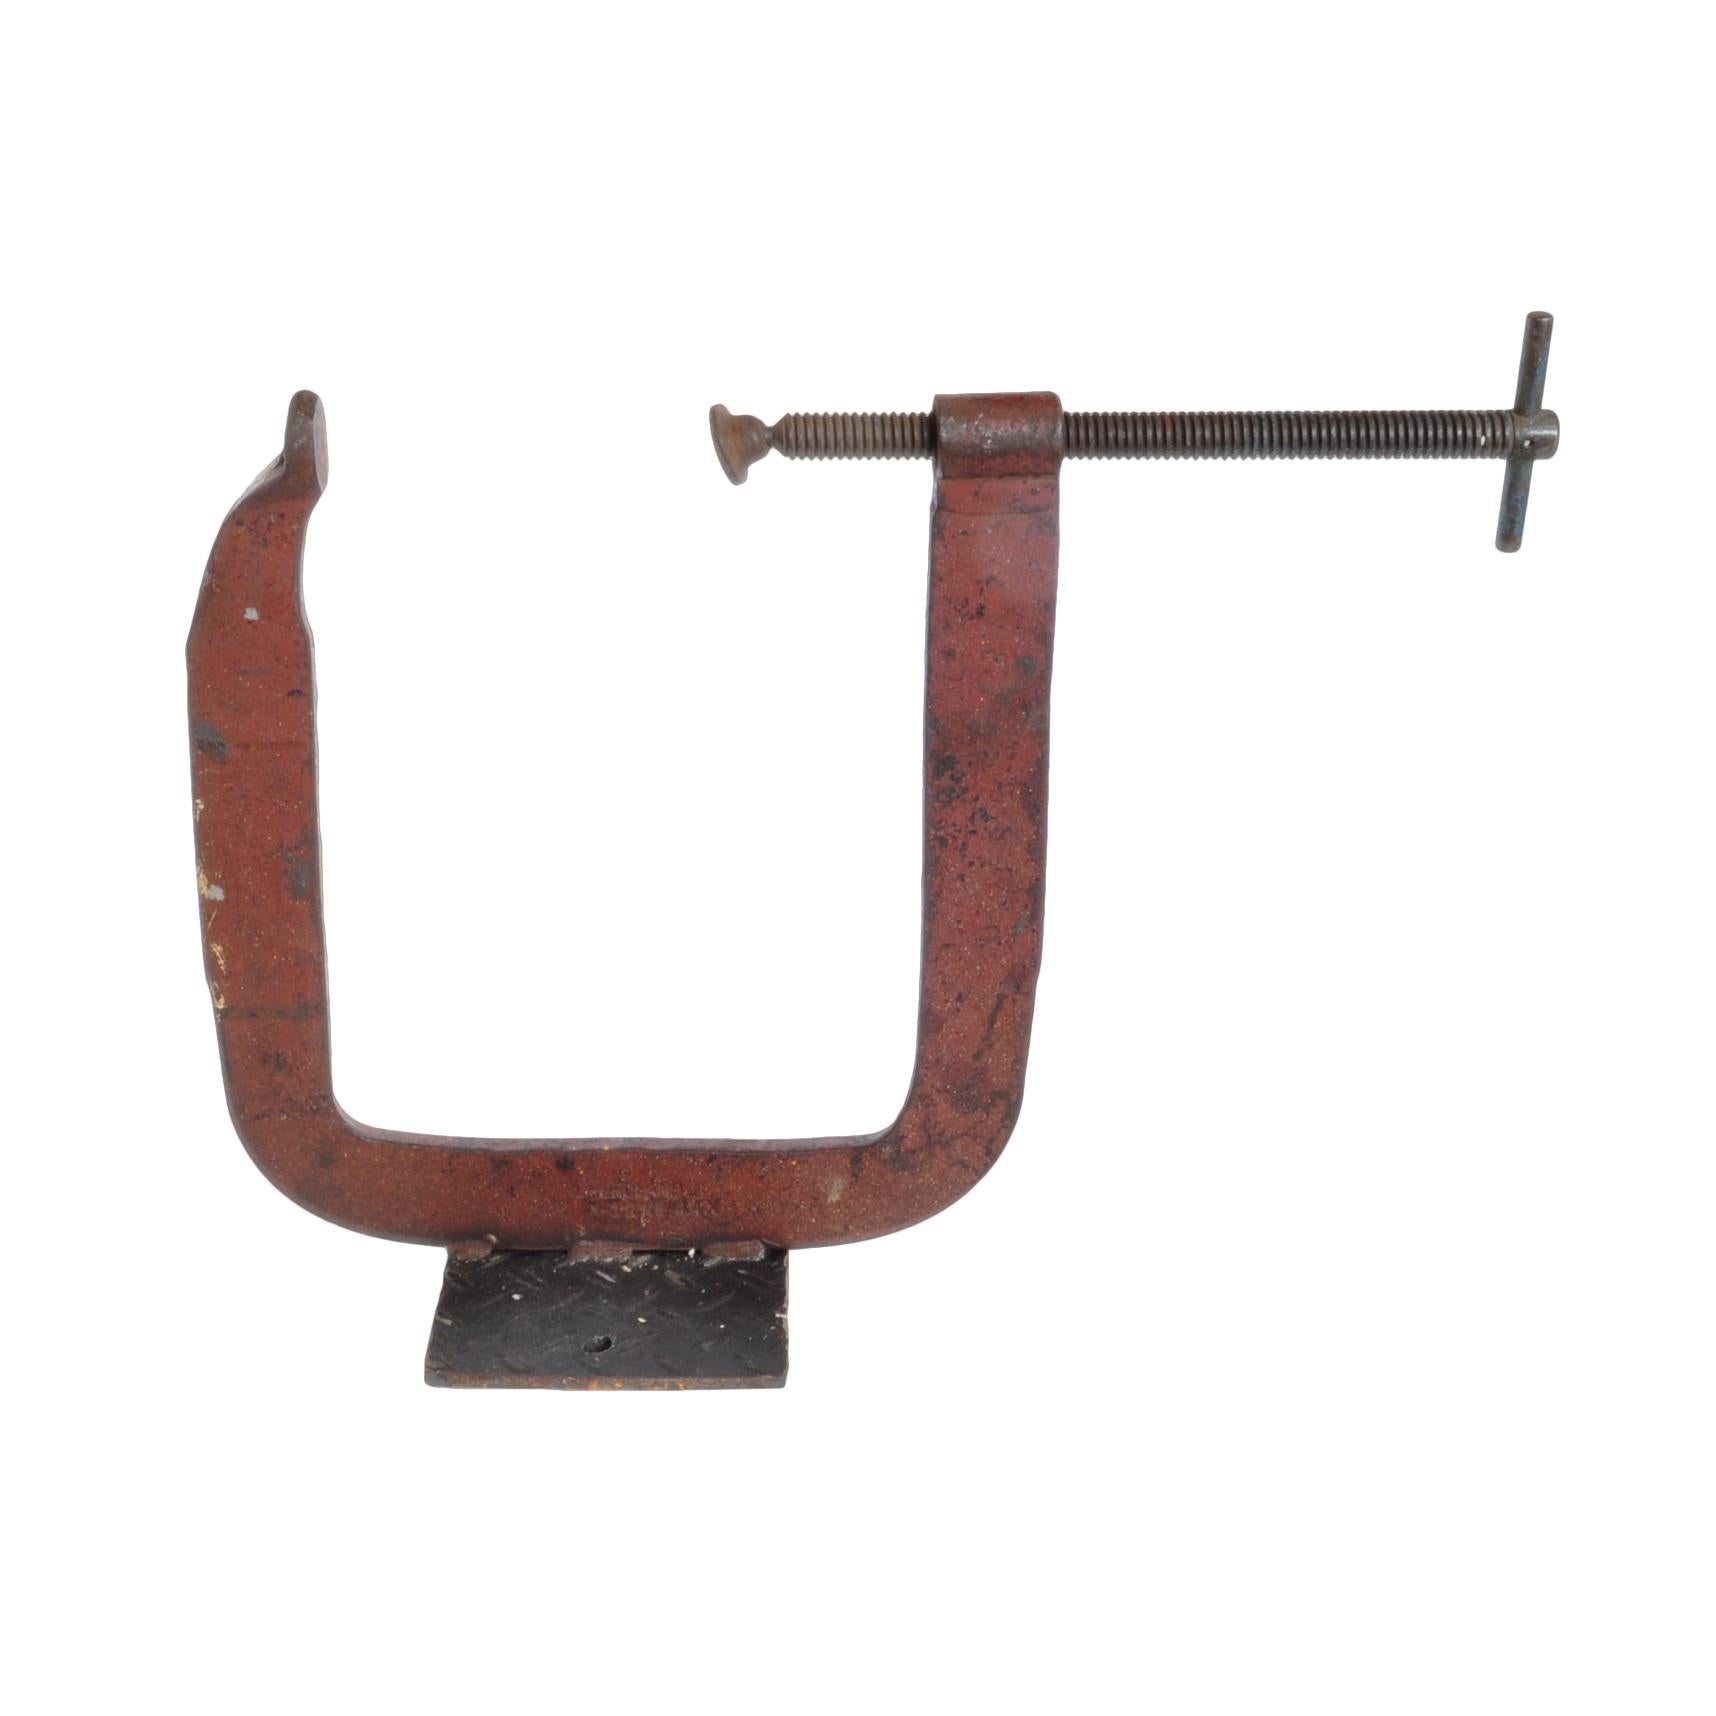 Introducing a stunning industrial C-shaped clamp, expertly welded to a durable steel base. This unique piece is not only functional but also a charming addition to your home decor. With its rustic appeal, it's sure to add a touch of character and